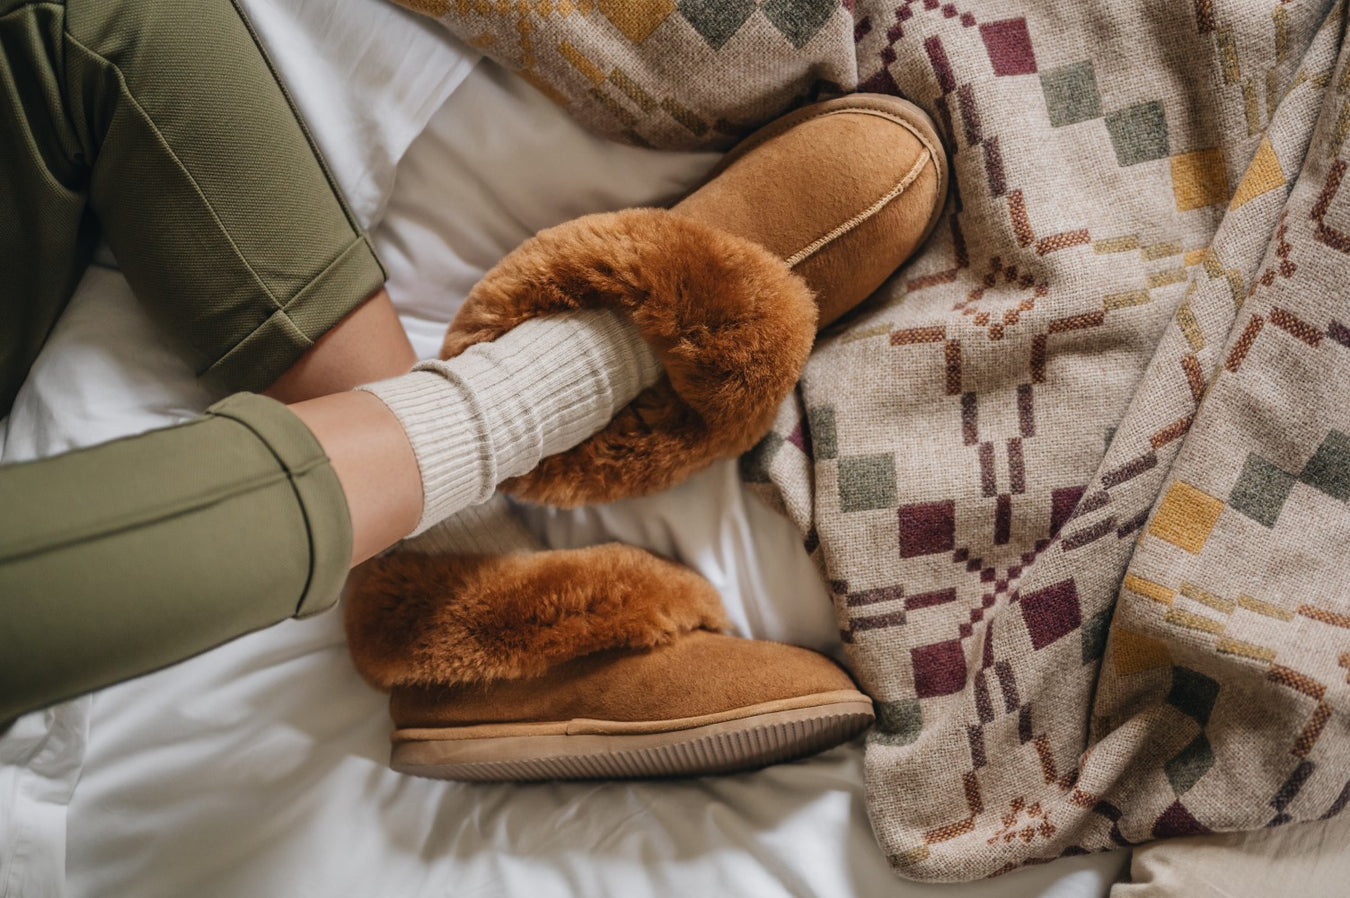 top view of warm brown/orange sheepskin slipper boots on a bed. Featuring a fluffy trim, soft suede outer, and decorative centre seam